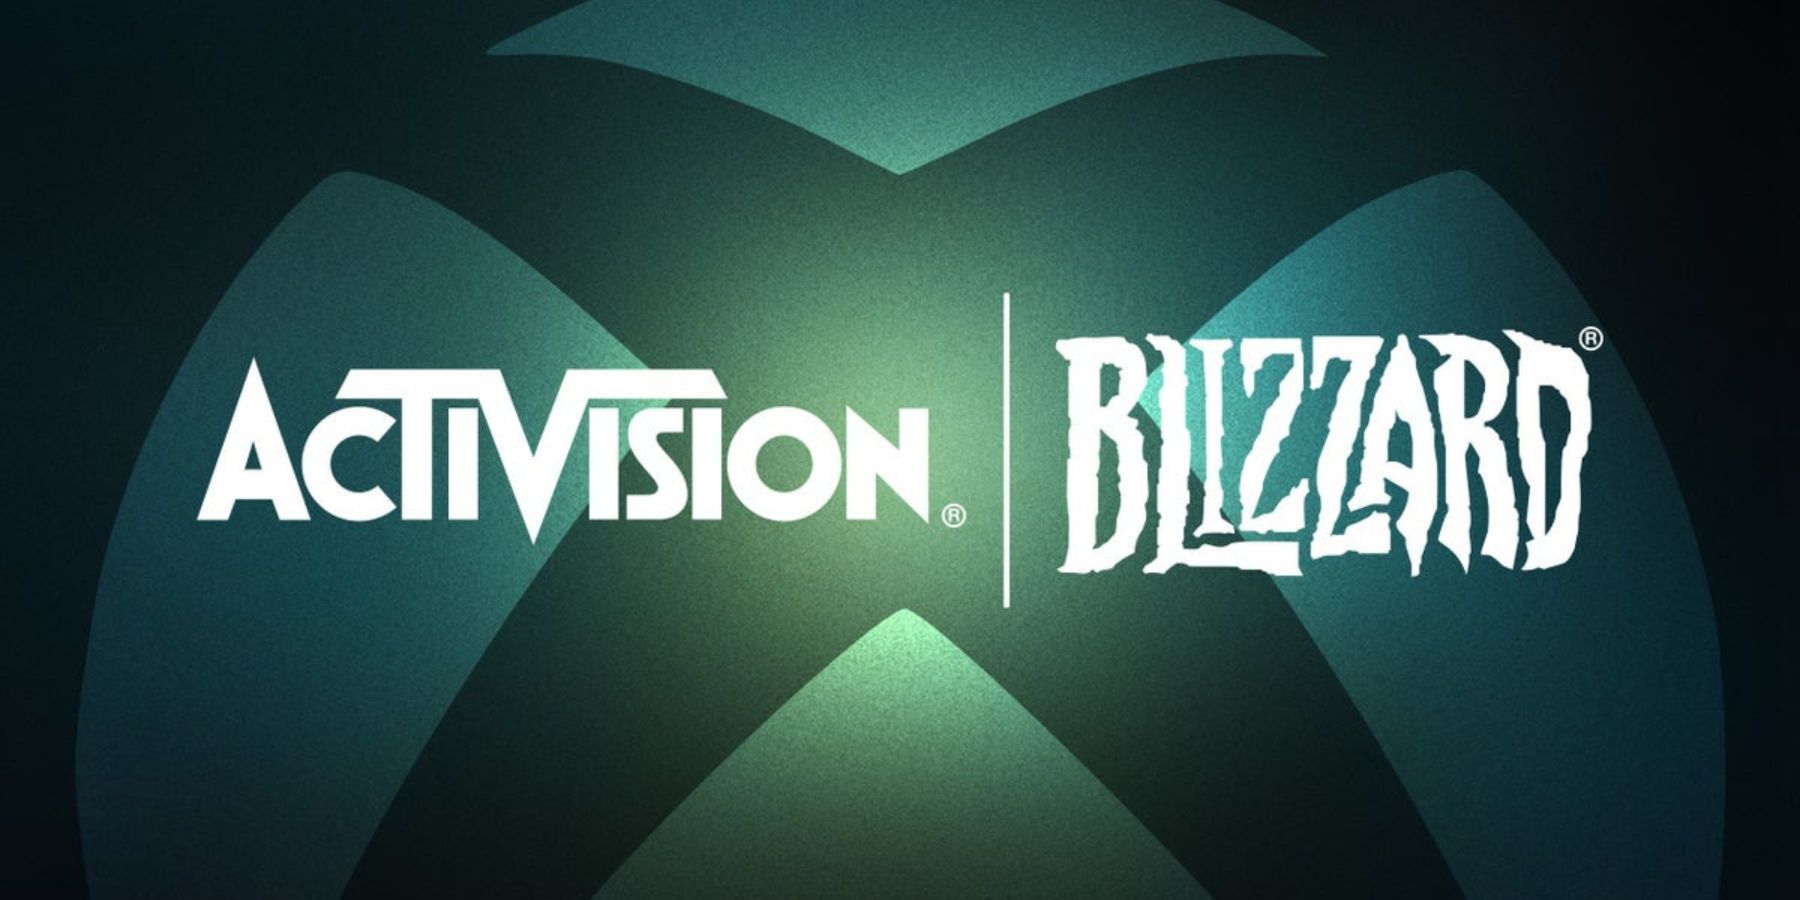 Microsoft's acquisition of Activision Blizzard: The road to approval